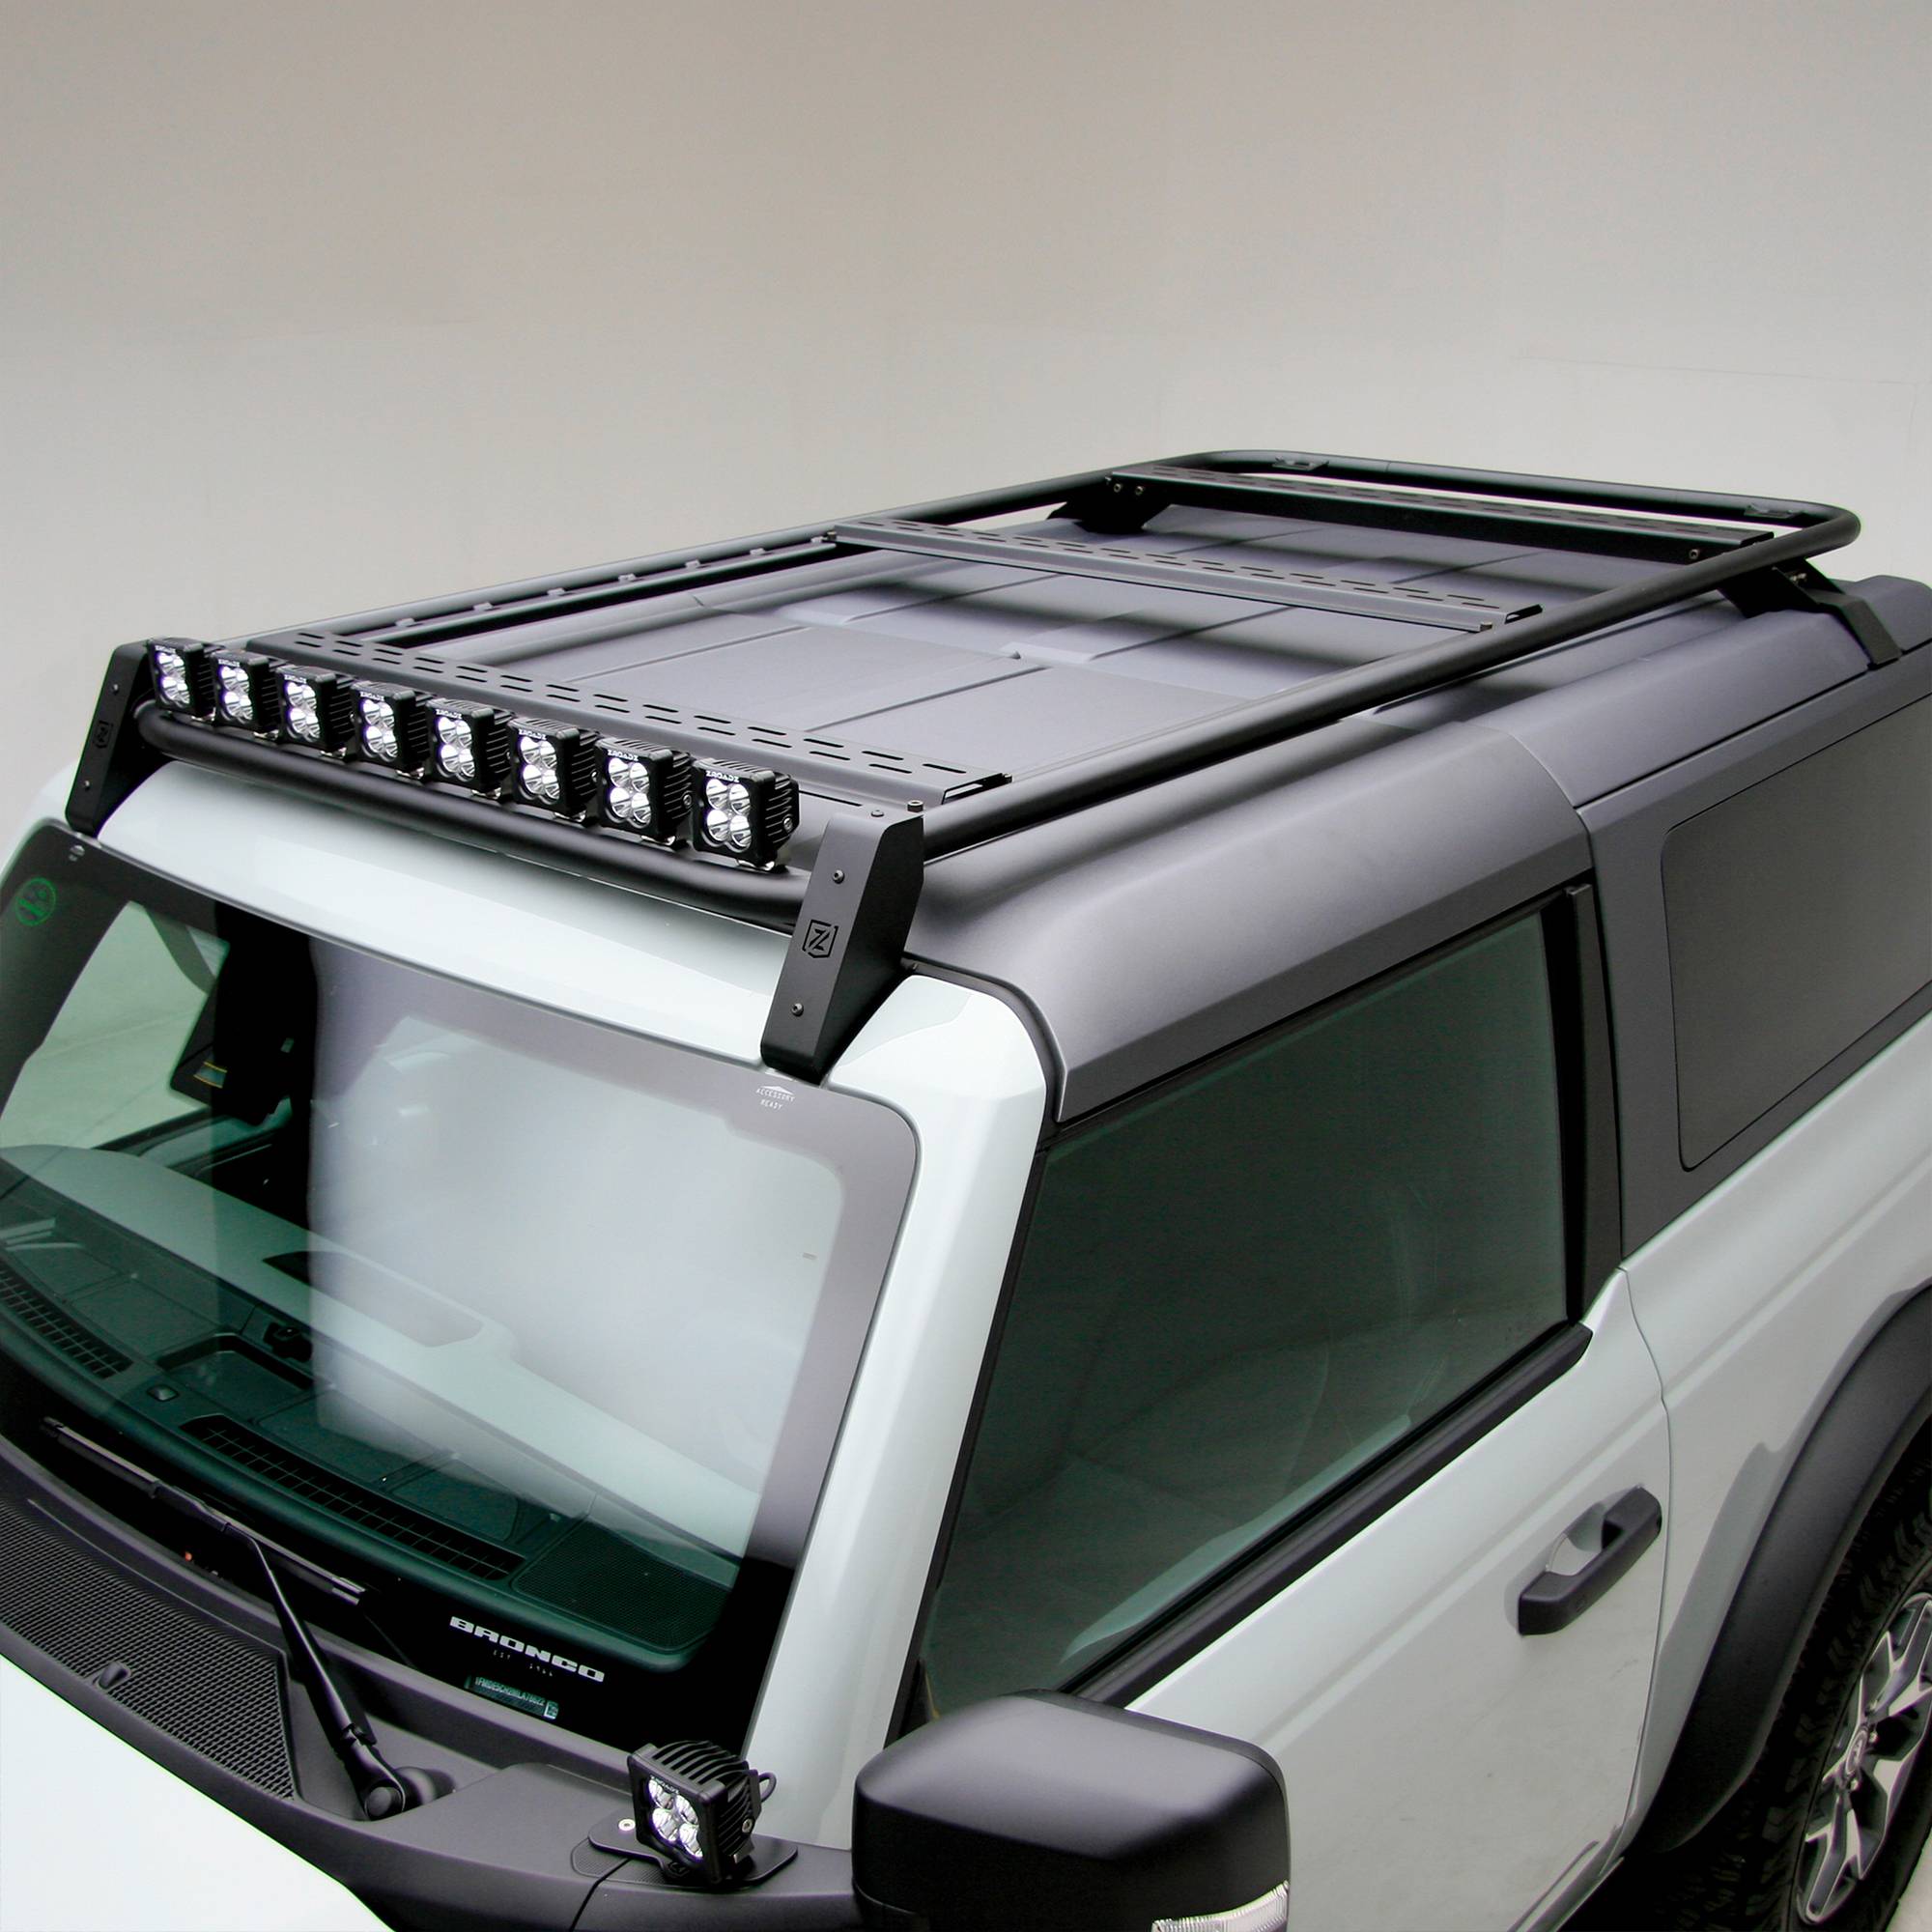 ZROADZ OFF ROAD PRODUCTS - 2021-2023 Ford Bronco 2 Door Roof Rack KIT, Includes (6) 3 inch ZROADZ White and (2) Amber LED Pods Lights - Part # Z845211